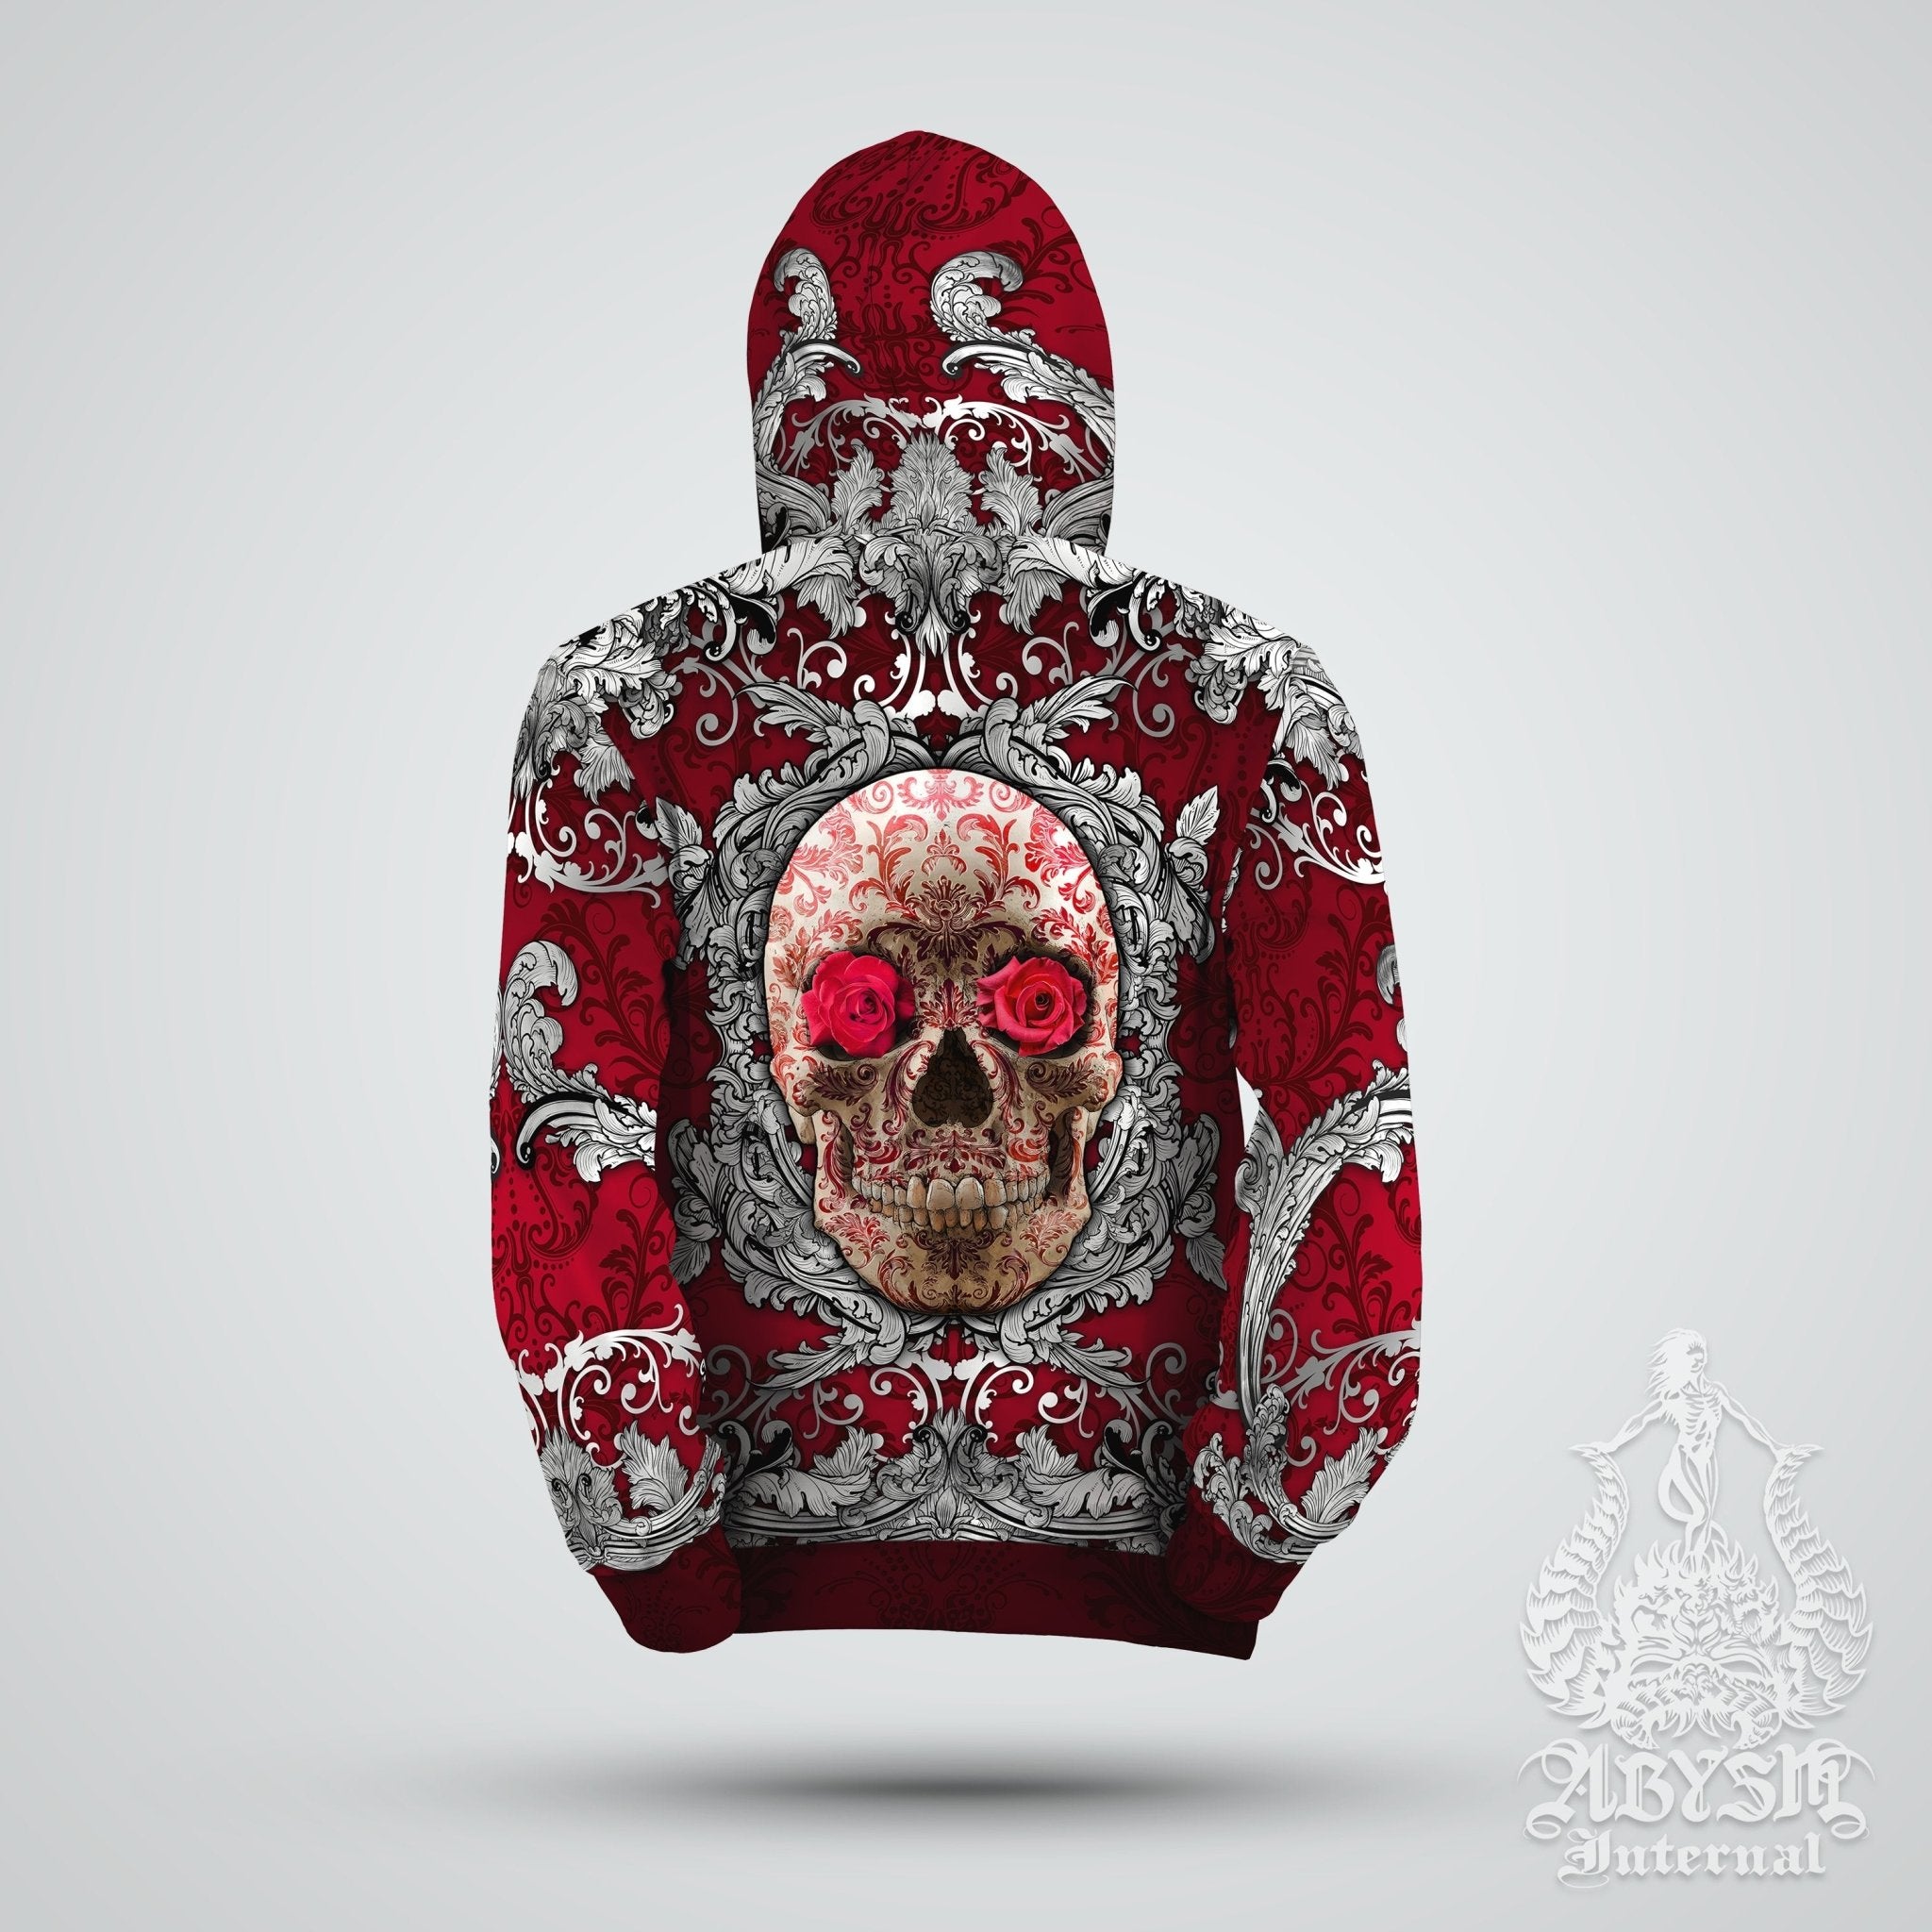 Skull Hoodie, Hip Hop Streetwear, Street Outfit, Goth Sweater, Alternative Clothing, Unisex - Silver and Red - Abysm Internal